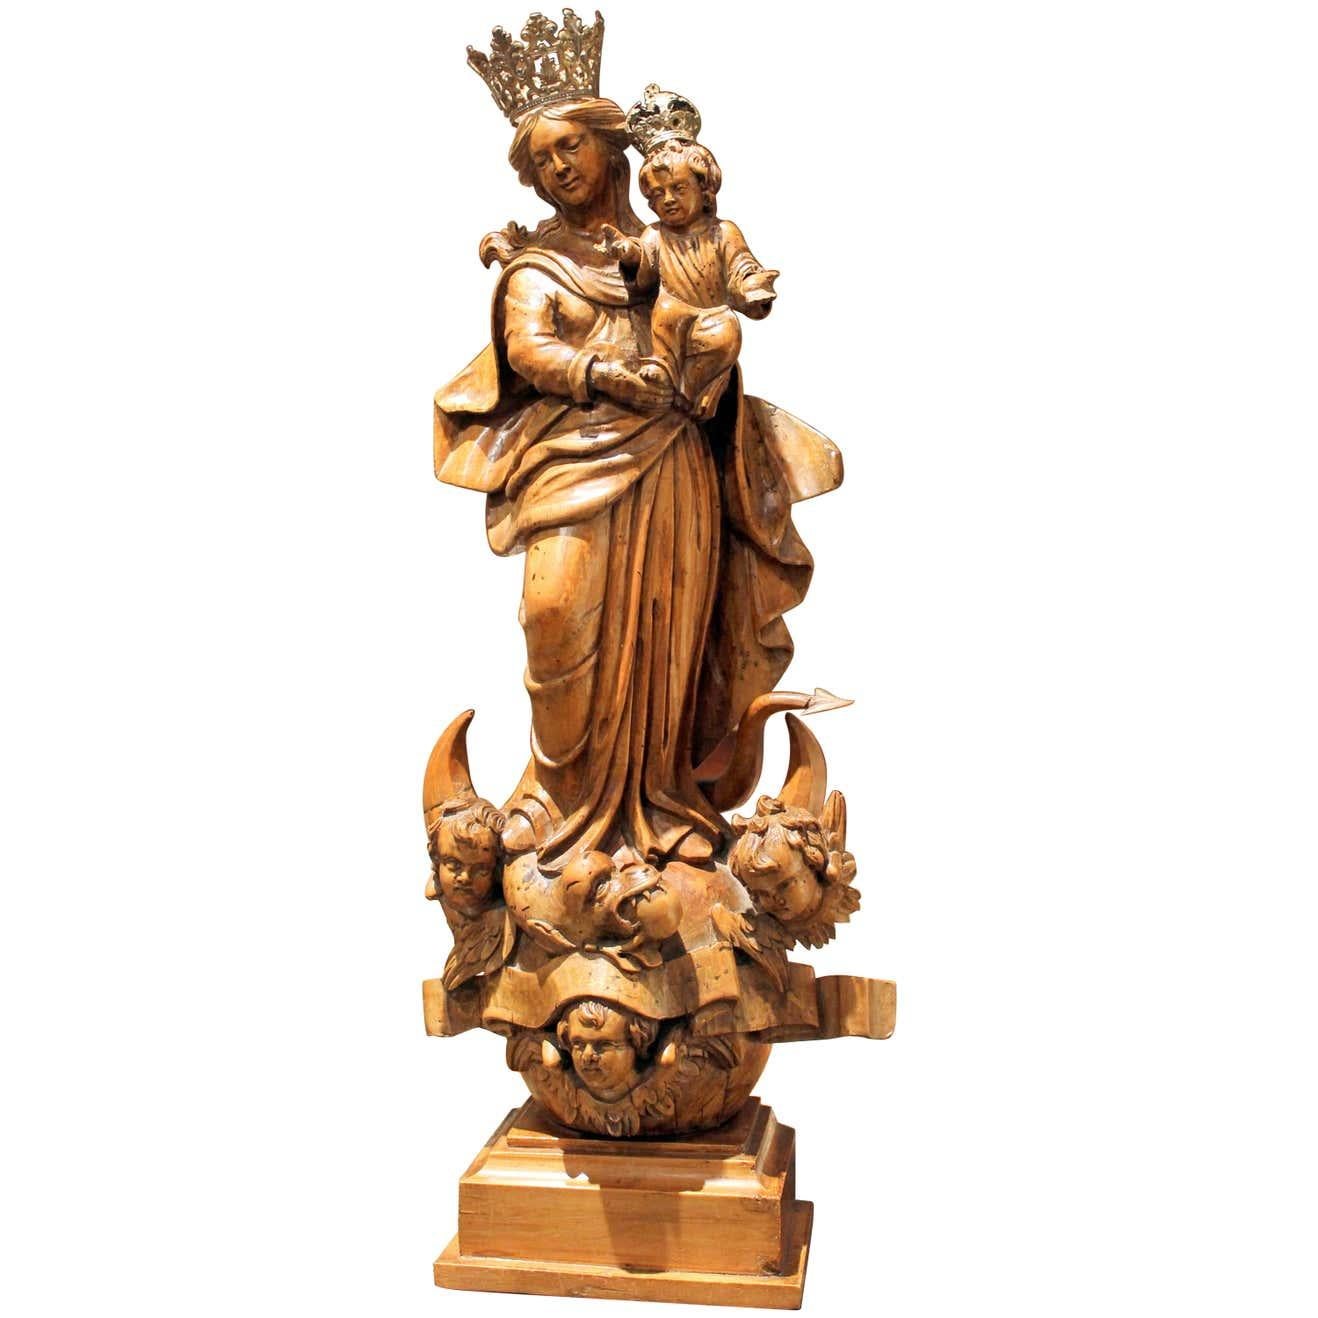 Unknown Figurative Sculpture - Italian Hand Carved Wood Madonna and Child on Crescent Moon Religious Sculpture